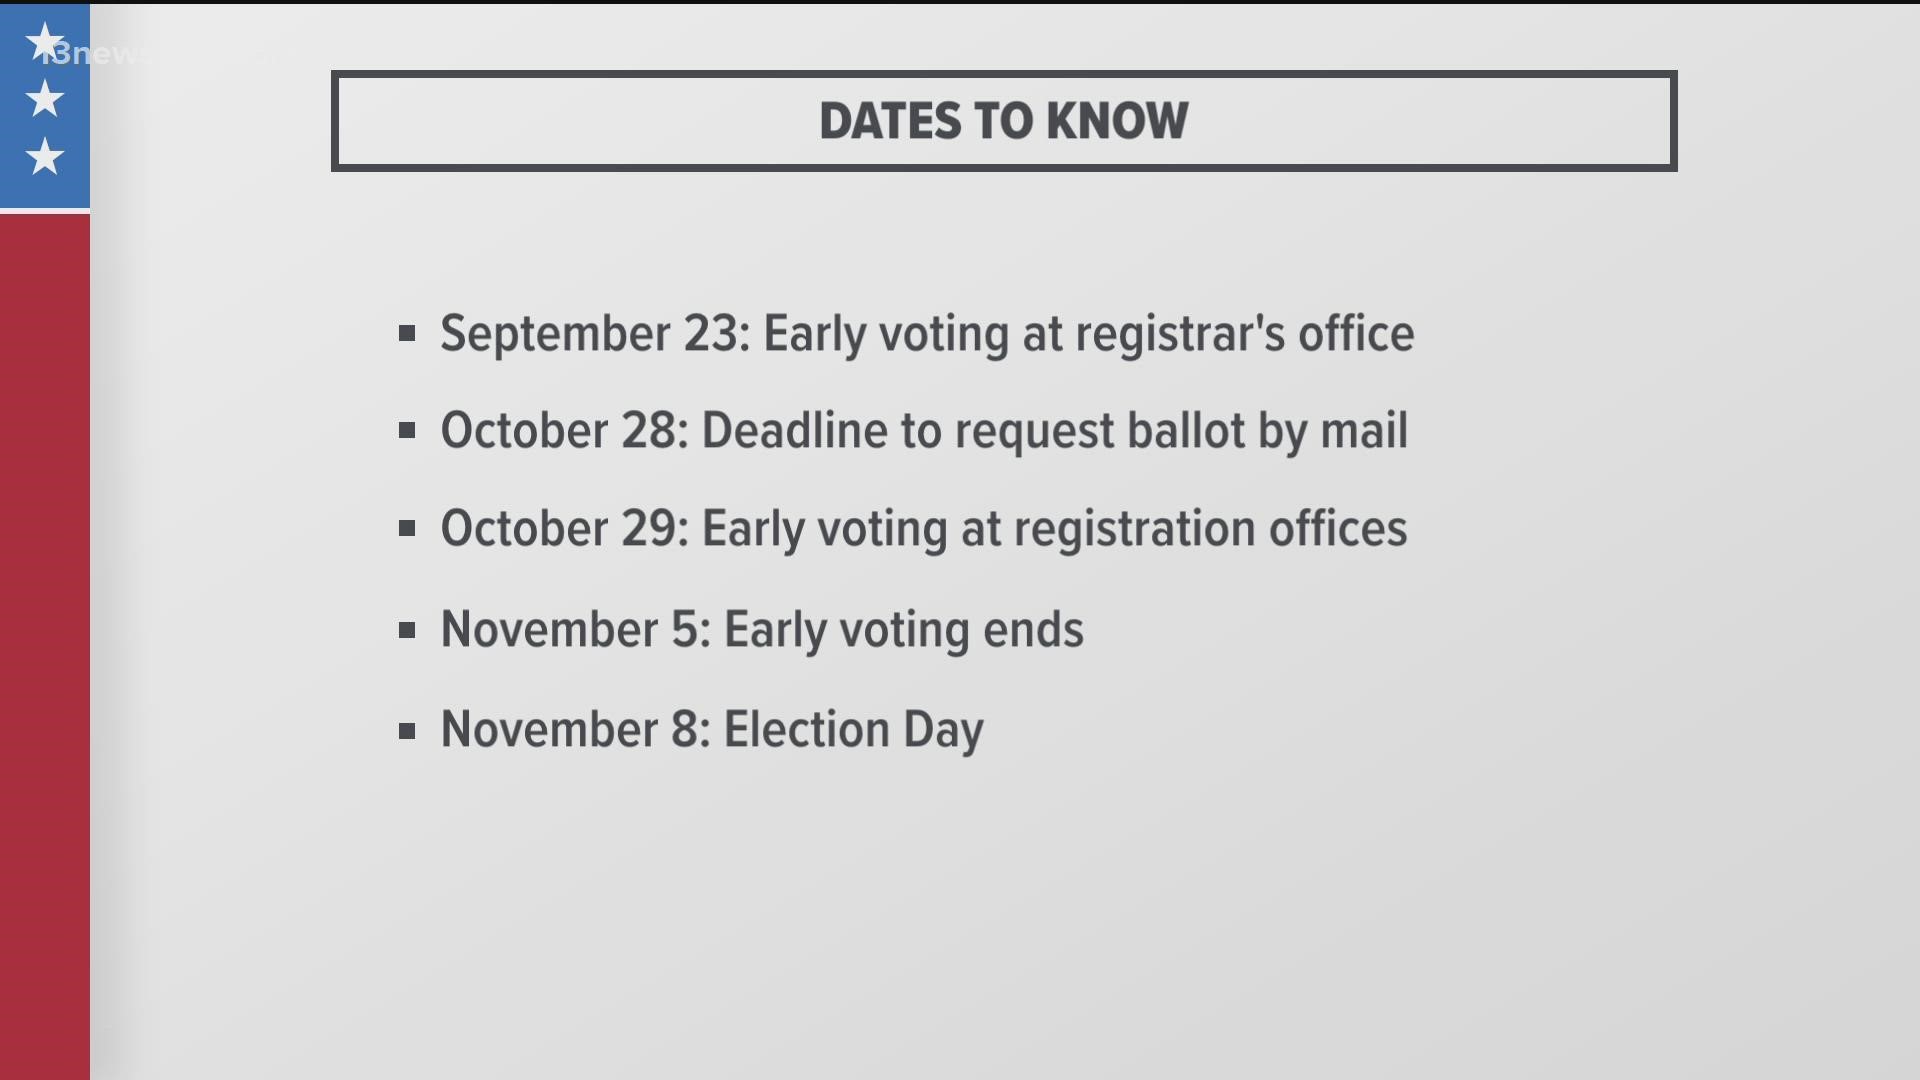 You can start early voting as soon as this Friday.